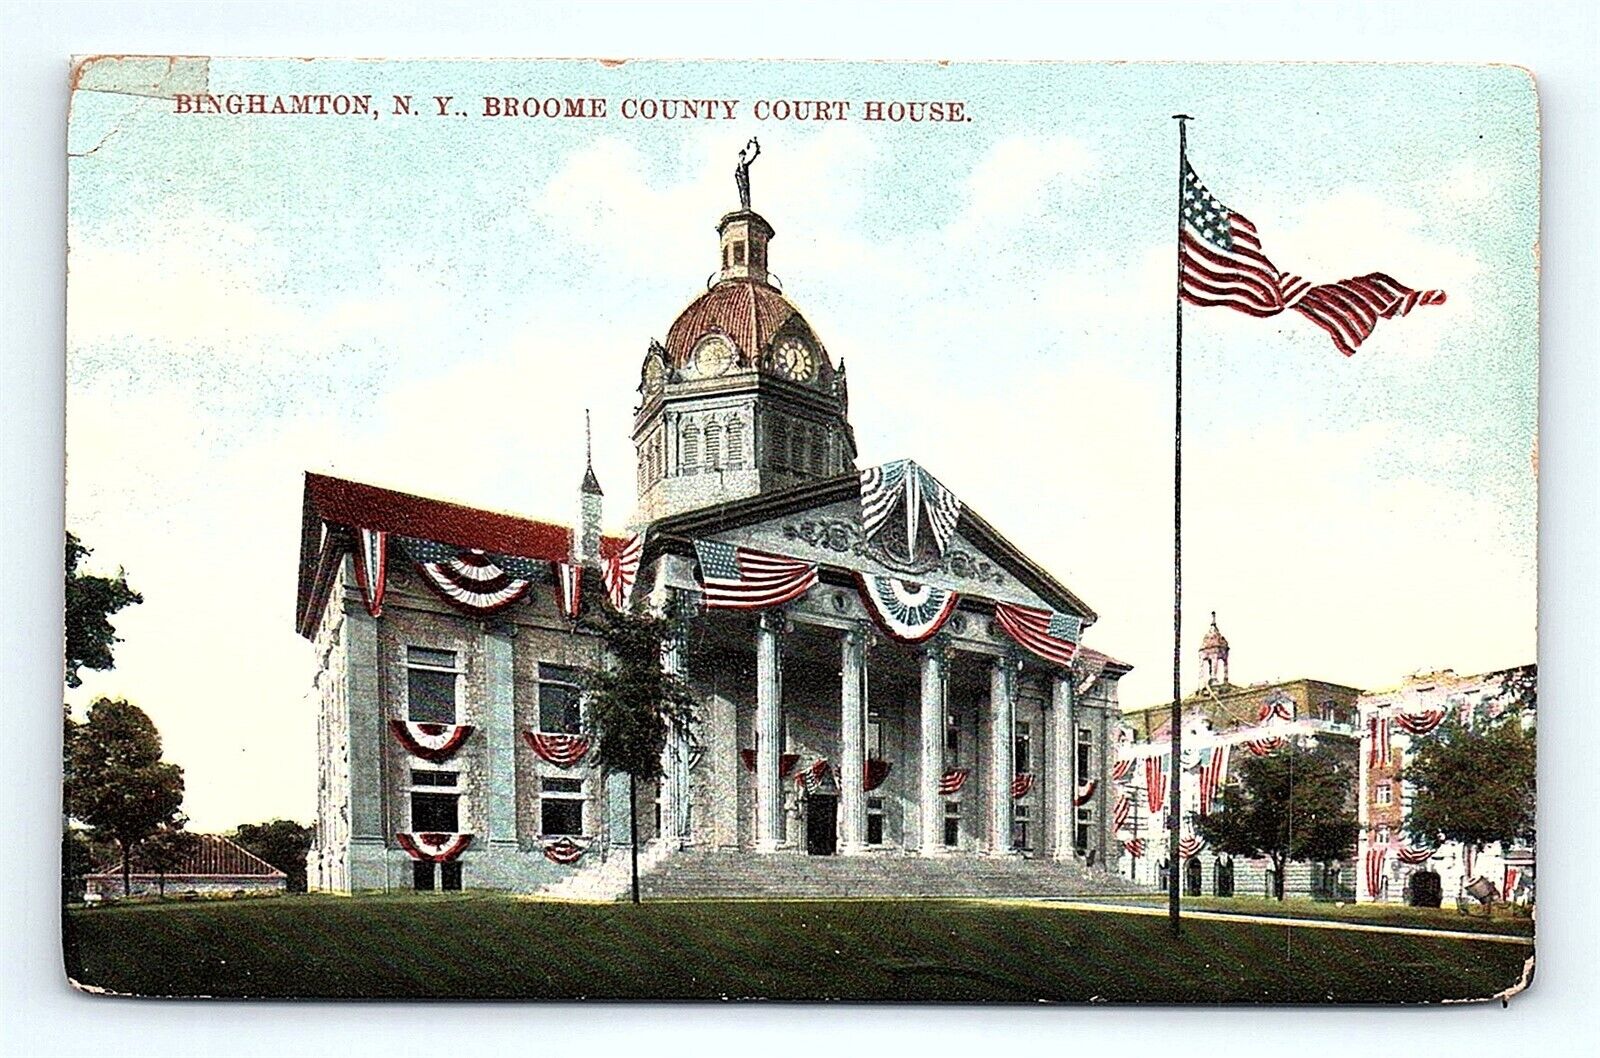 Postcard 1925 New York Broome County Court House Binghamton, N.Y. Southern Tier